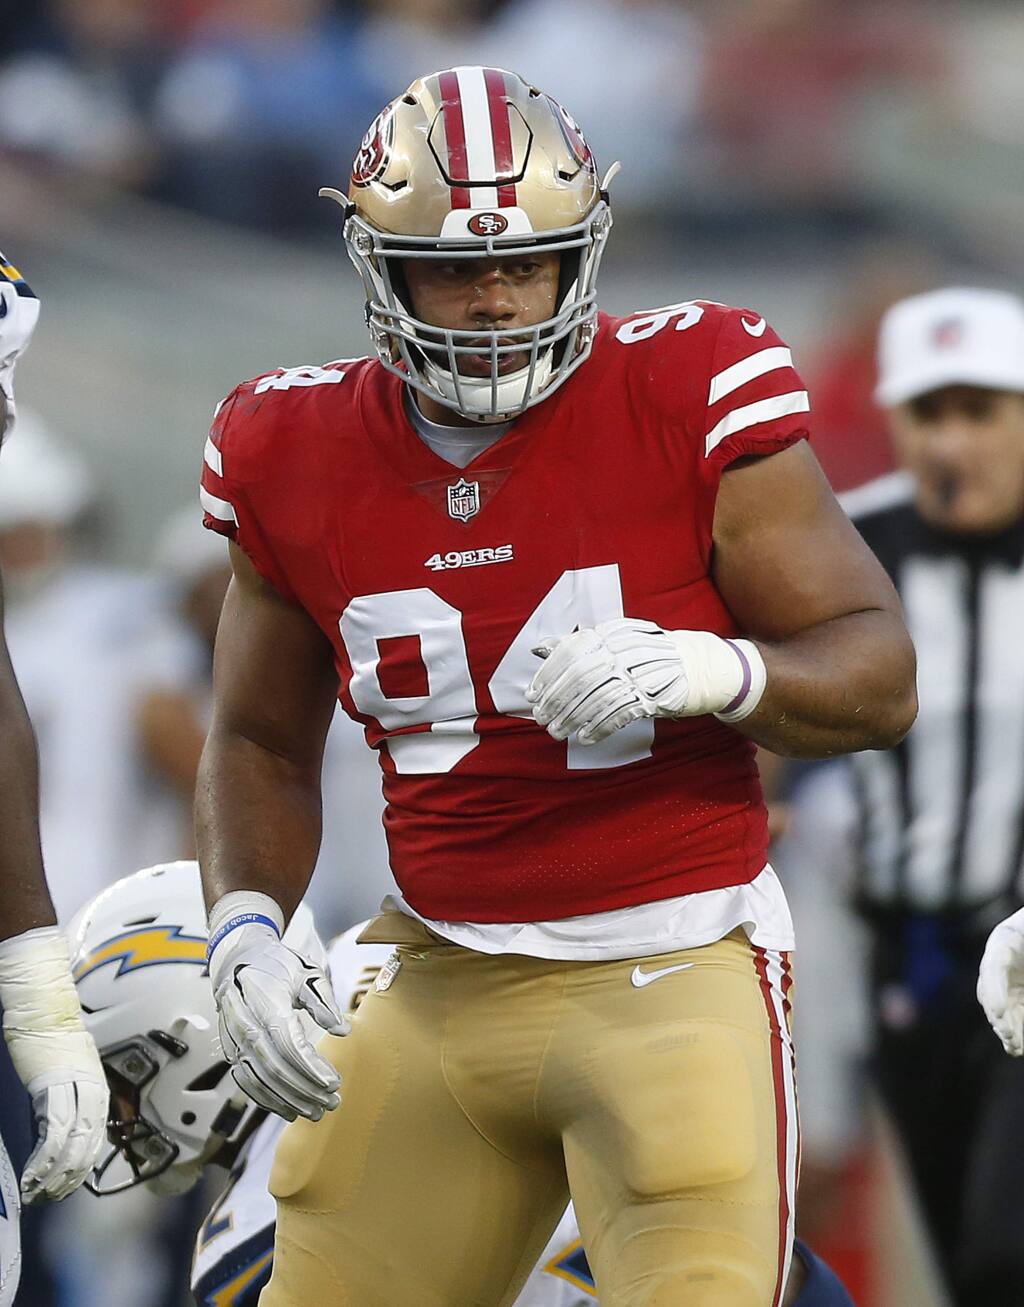 San Francisco 49ers defensive end Solomon Thomas during a game against the Los Angeles Chargers in Santa Clara, Thursday, Aug. 30, 2018. (AP Photo/Josie Lepe)